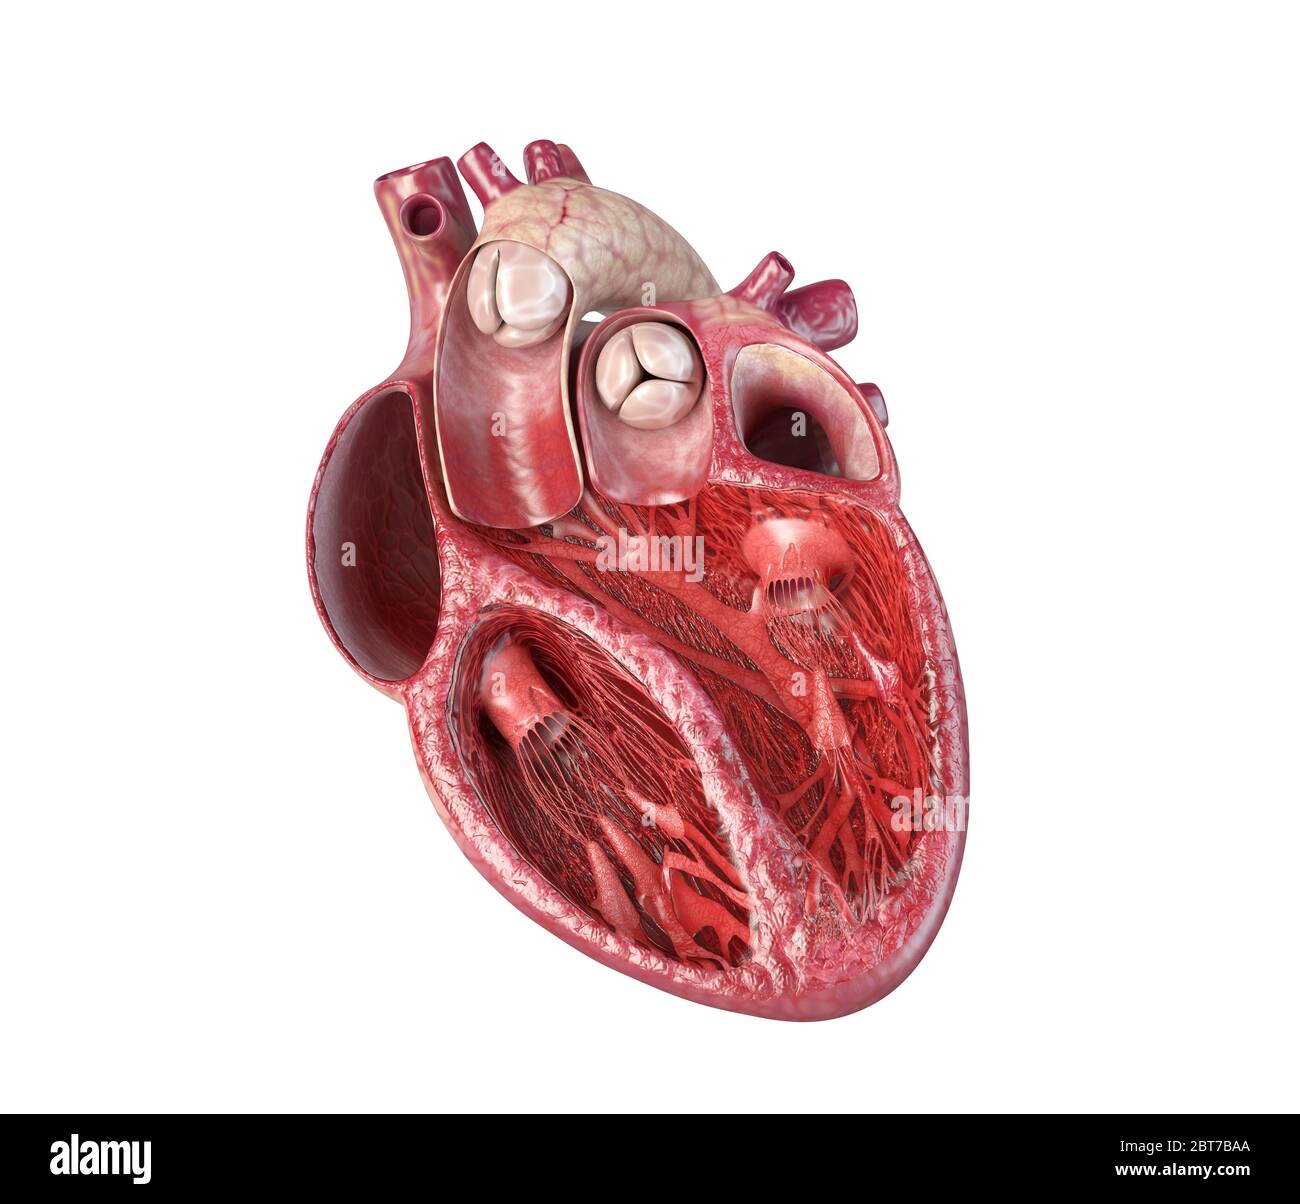 Human heart cross-section, with detailed internal structure. Close-up on white background. Stock Photo